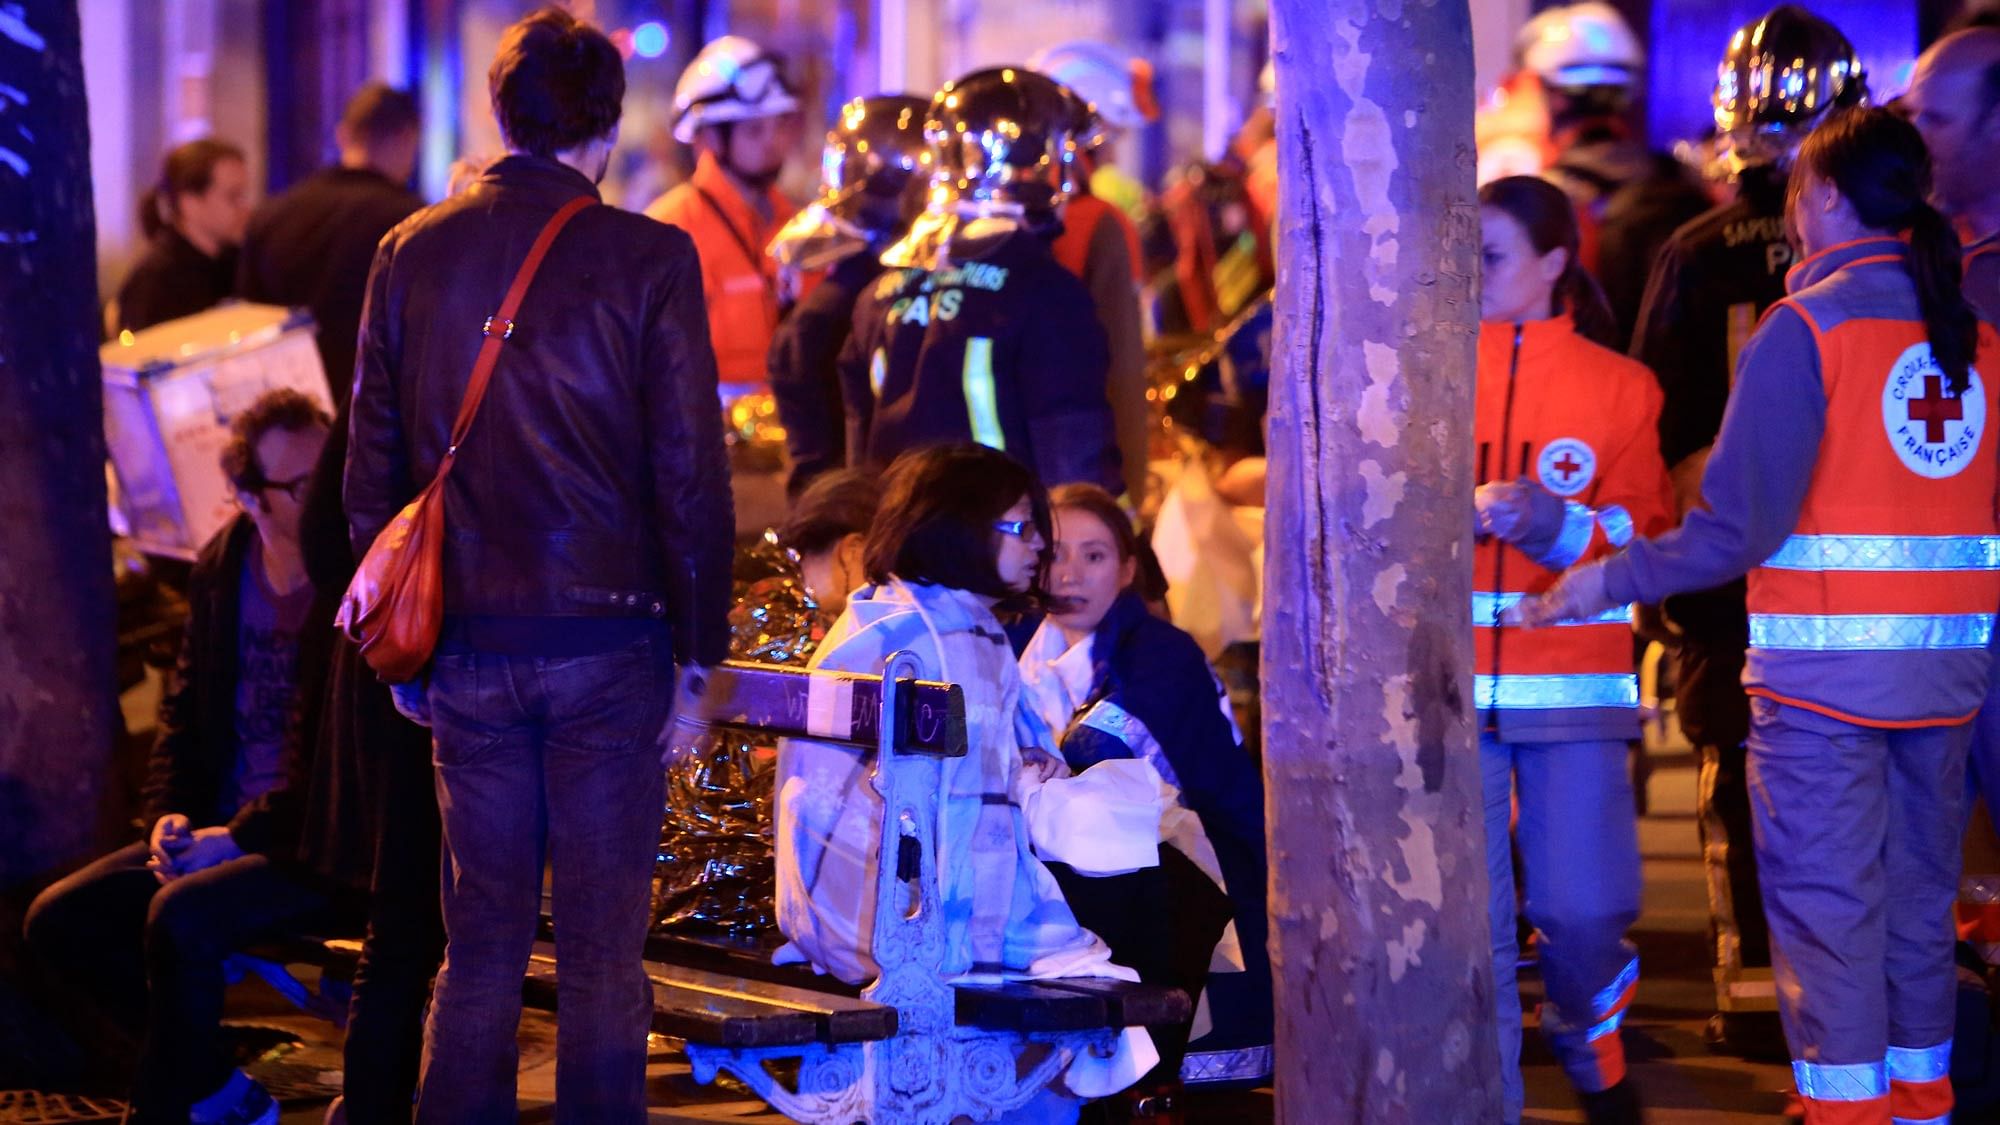 People rest on a bench after being evacuated from the Bataclan theatre in Paris following a shooting. (Photo: AP)